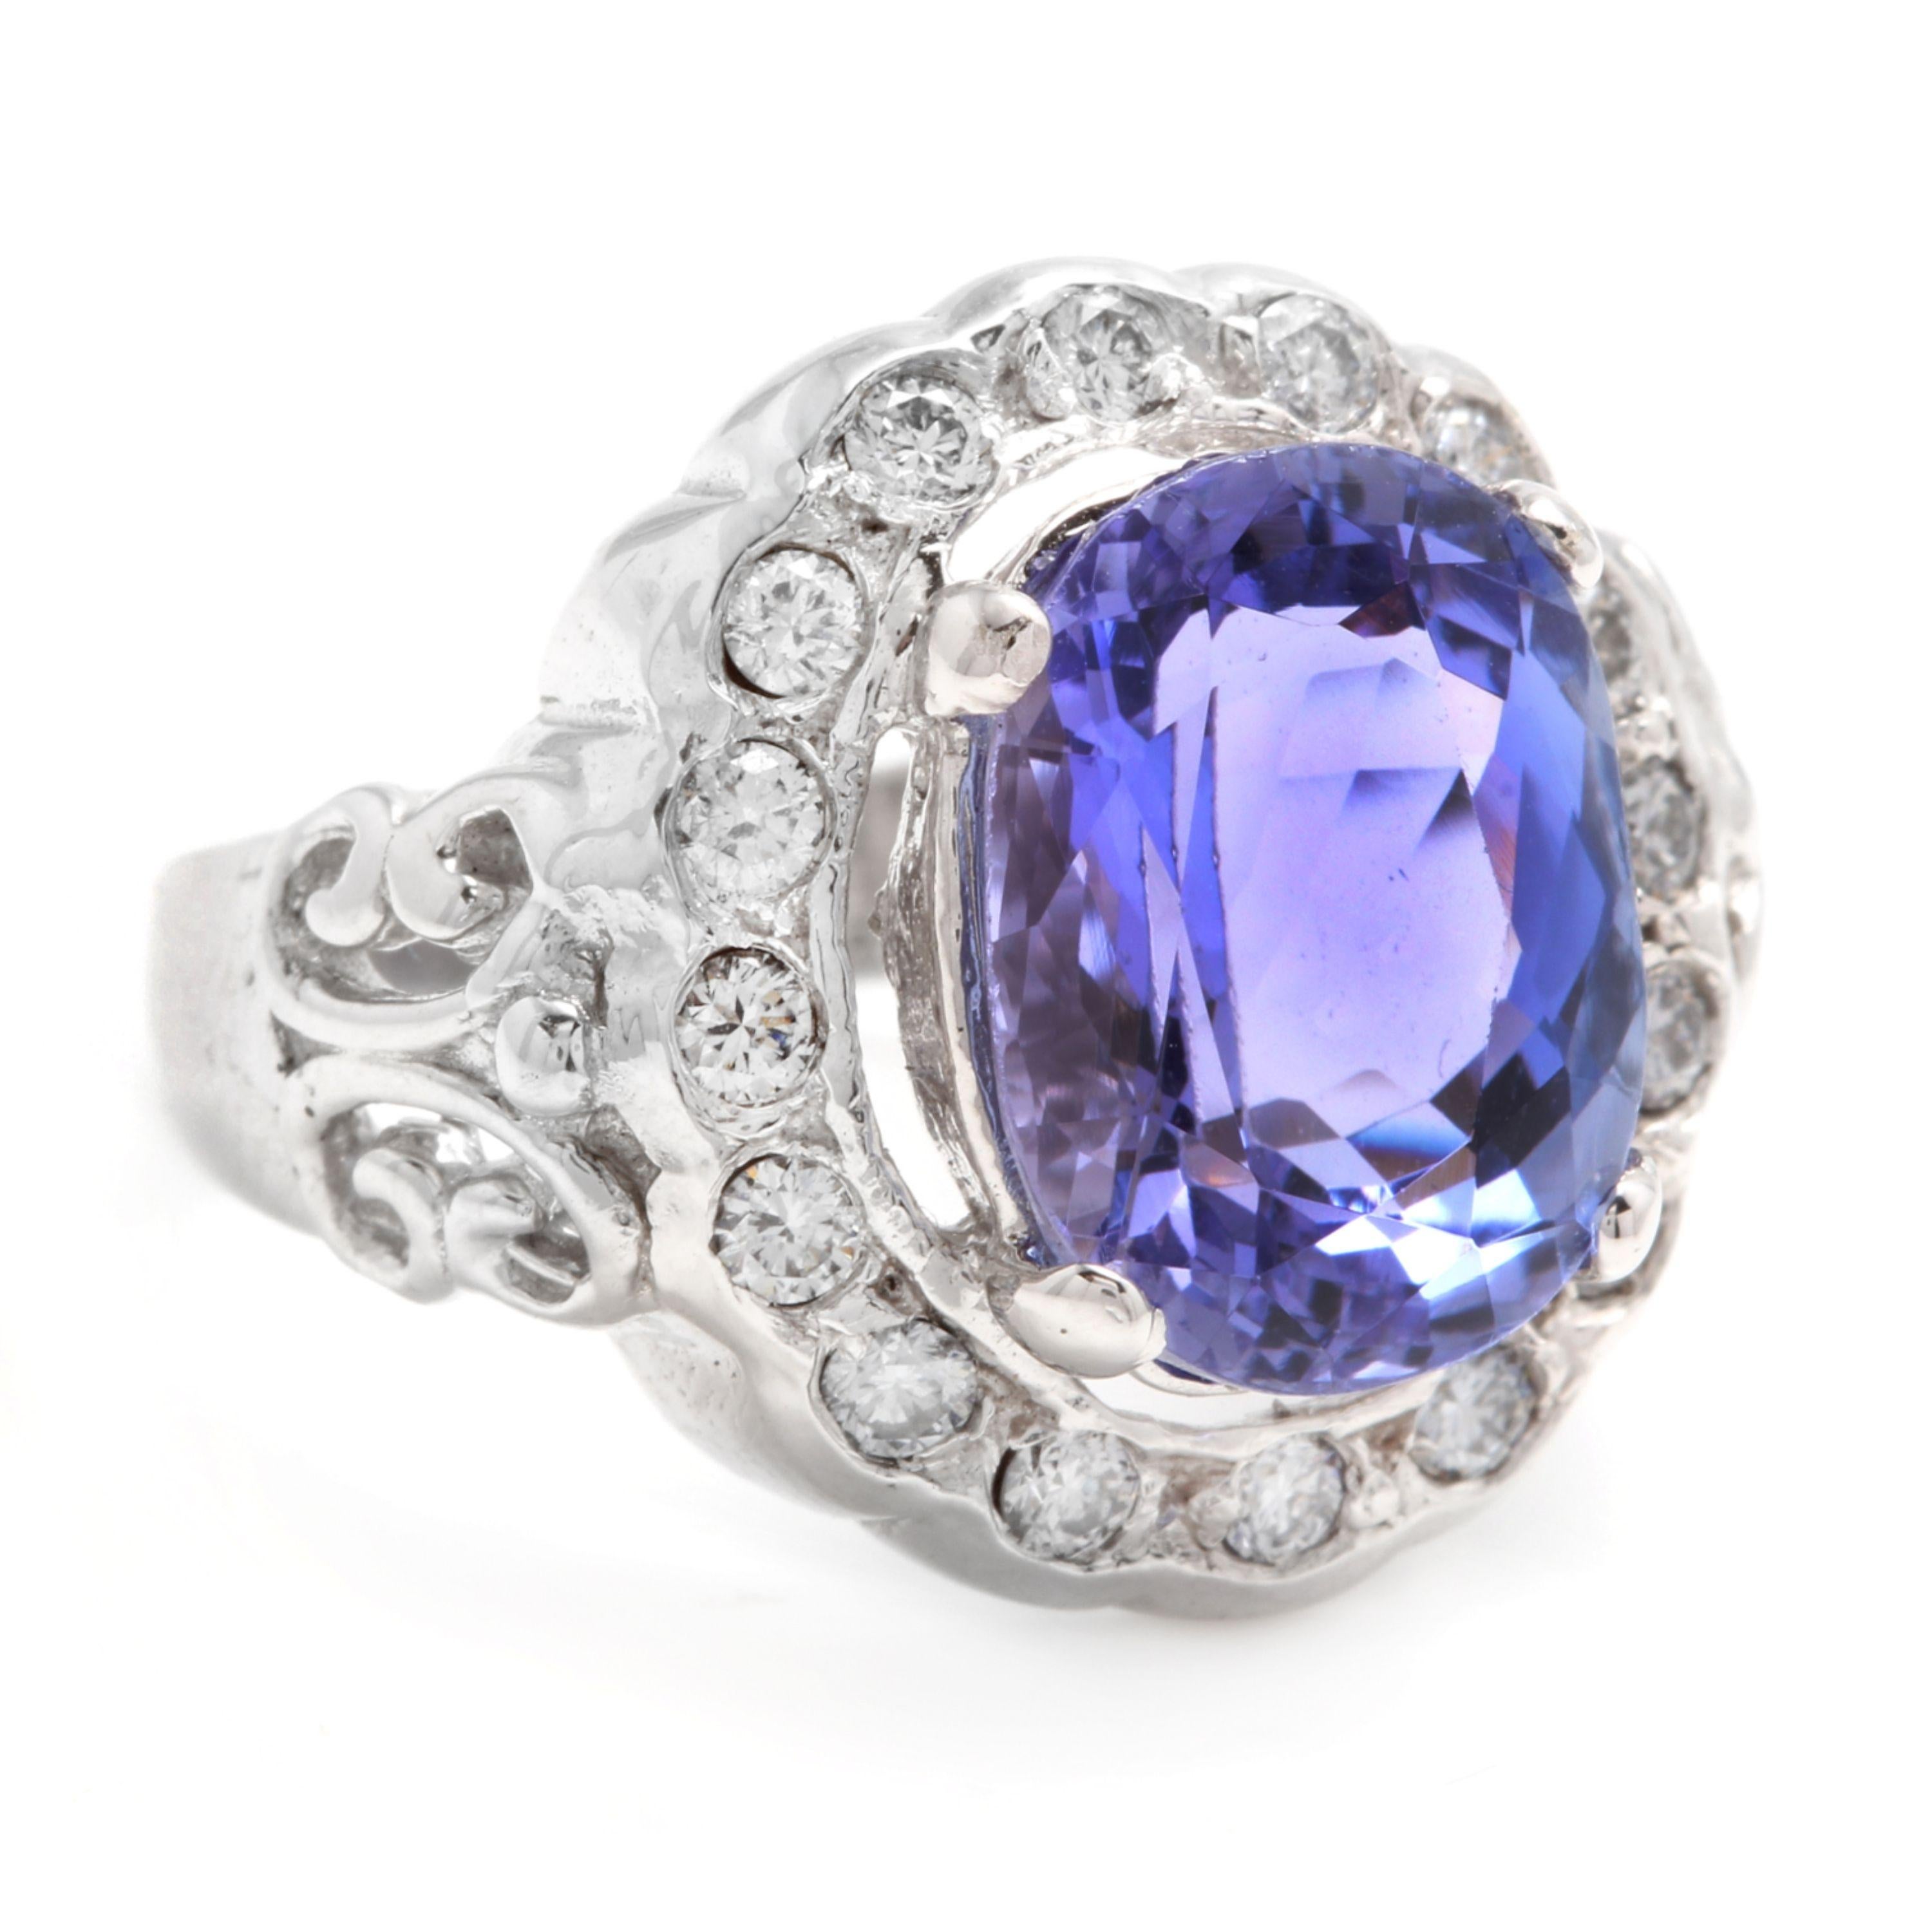 6.50 Carats Natural Very Nice Looking Tanzanite and Diamond 14K Solid White Gold Ring

Total Natural Oval Cut Tanzanite Weight is: Approx. 6.00 Carats

Tanzanite Measures: Approx. 12.00 x 10.00mm

Natural Round Diamonds Weight: Approx. 0.50 Carats